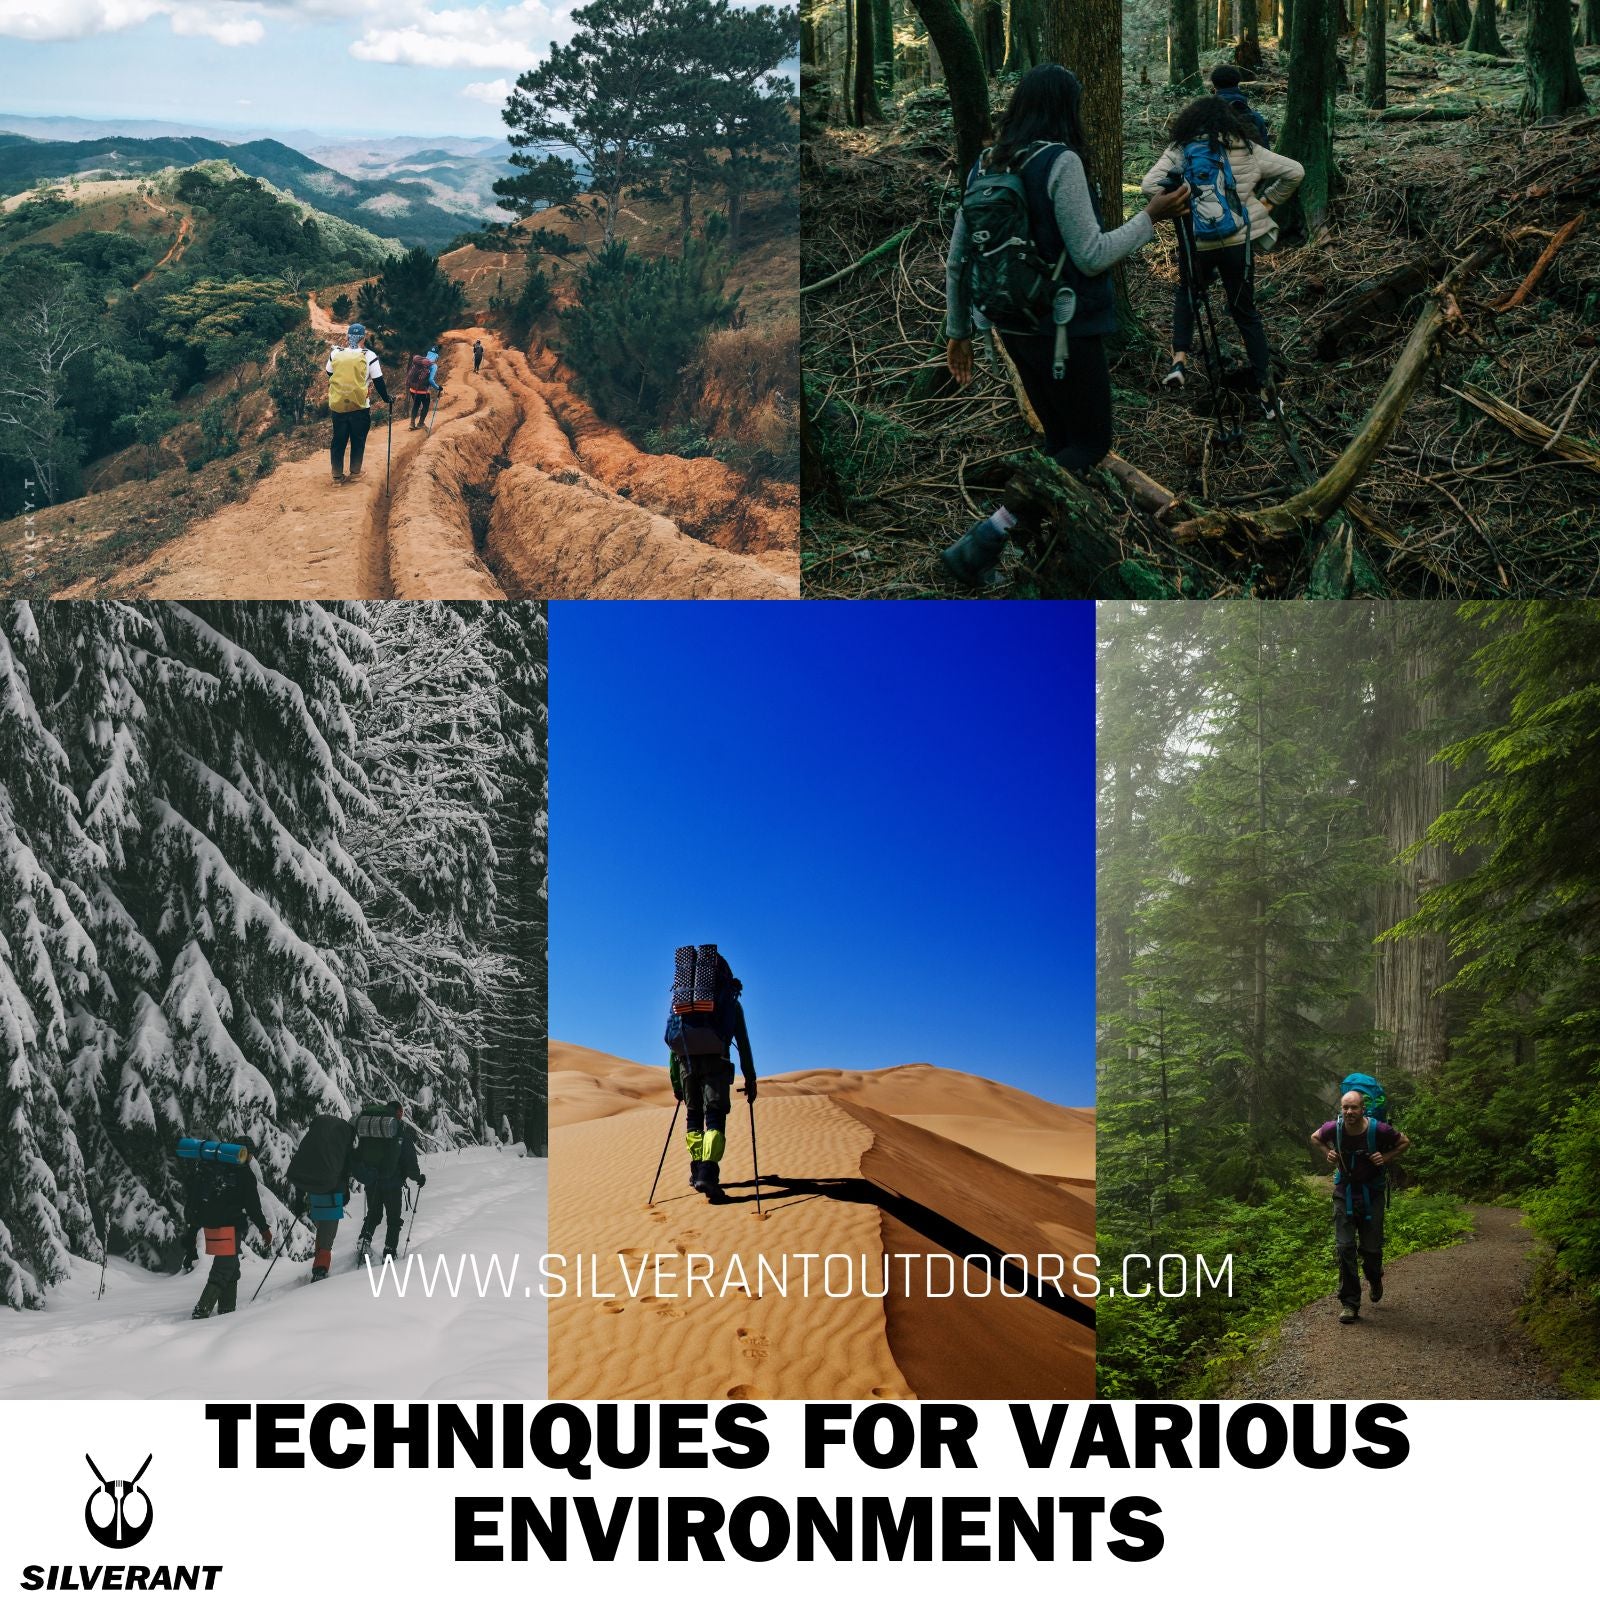 Ultralight Backpacking Techniques for Various Environments